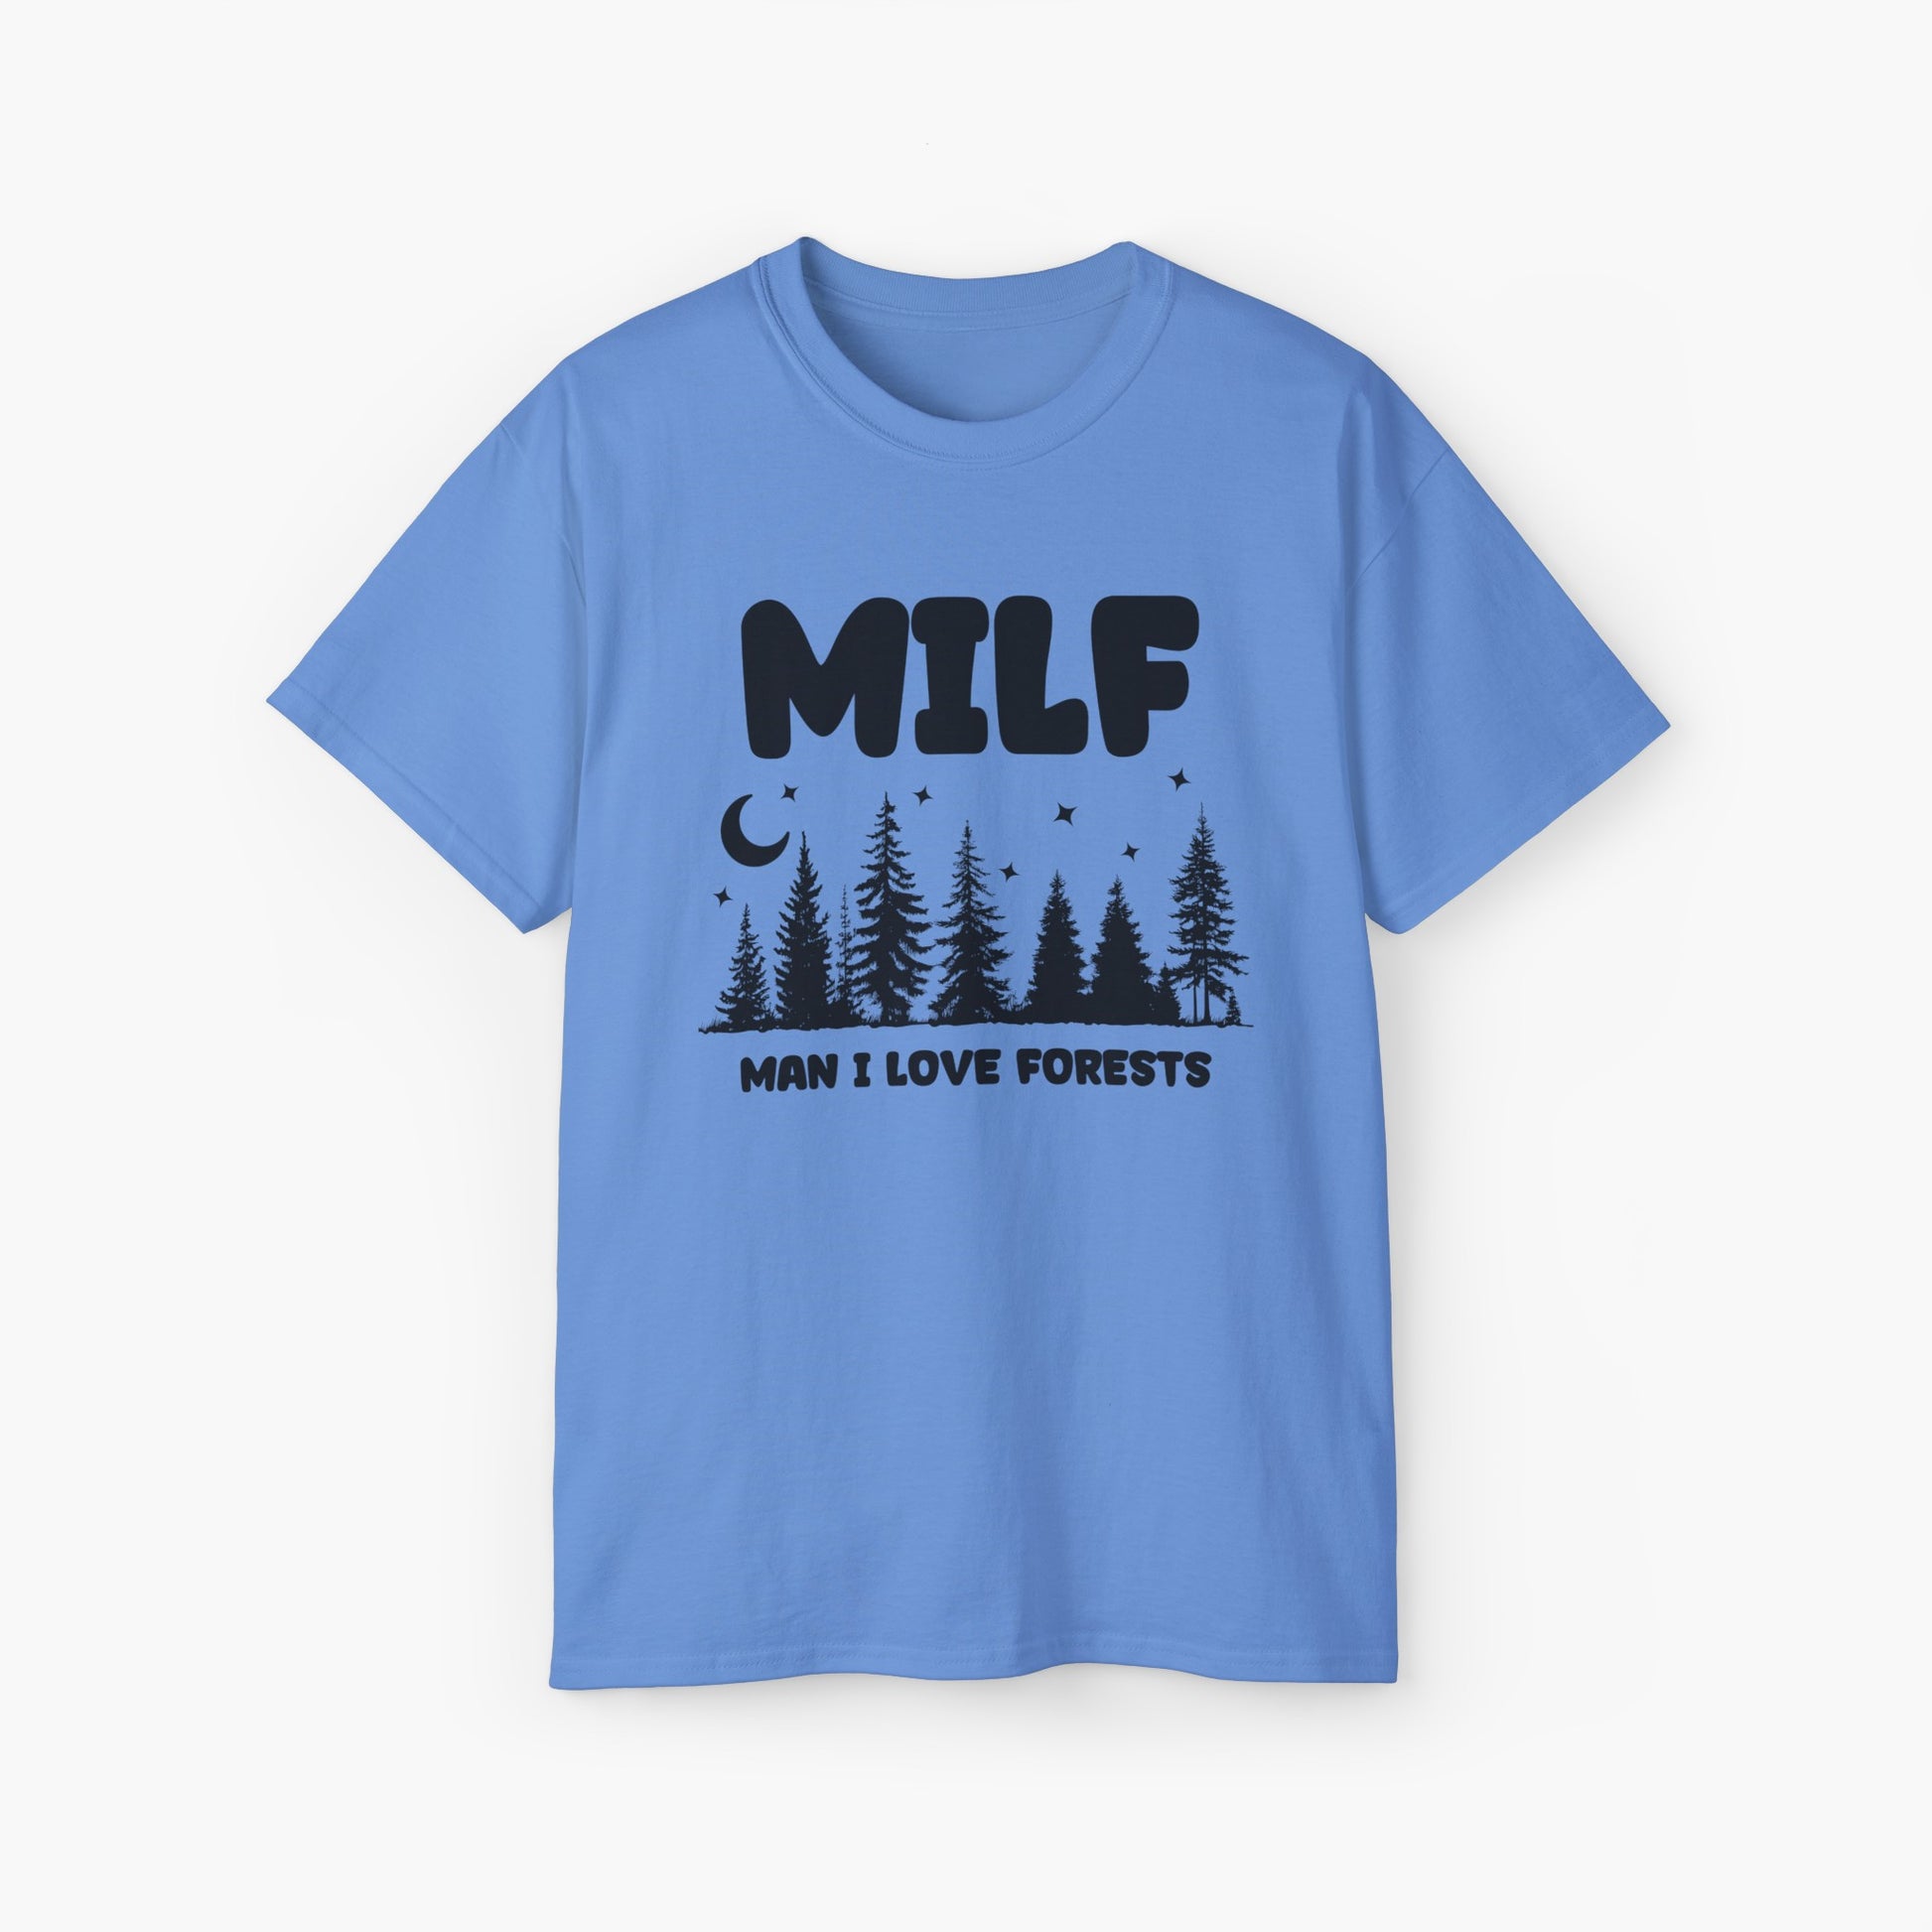 Blue t-shirt with the text 'MILF, Man I Love Forests,' featuring trees, stars, and a moon on a plain background.